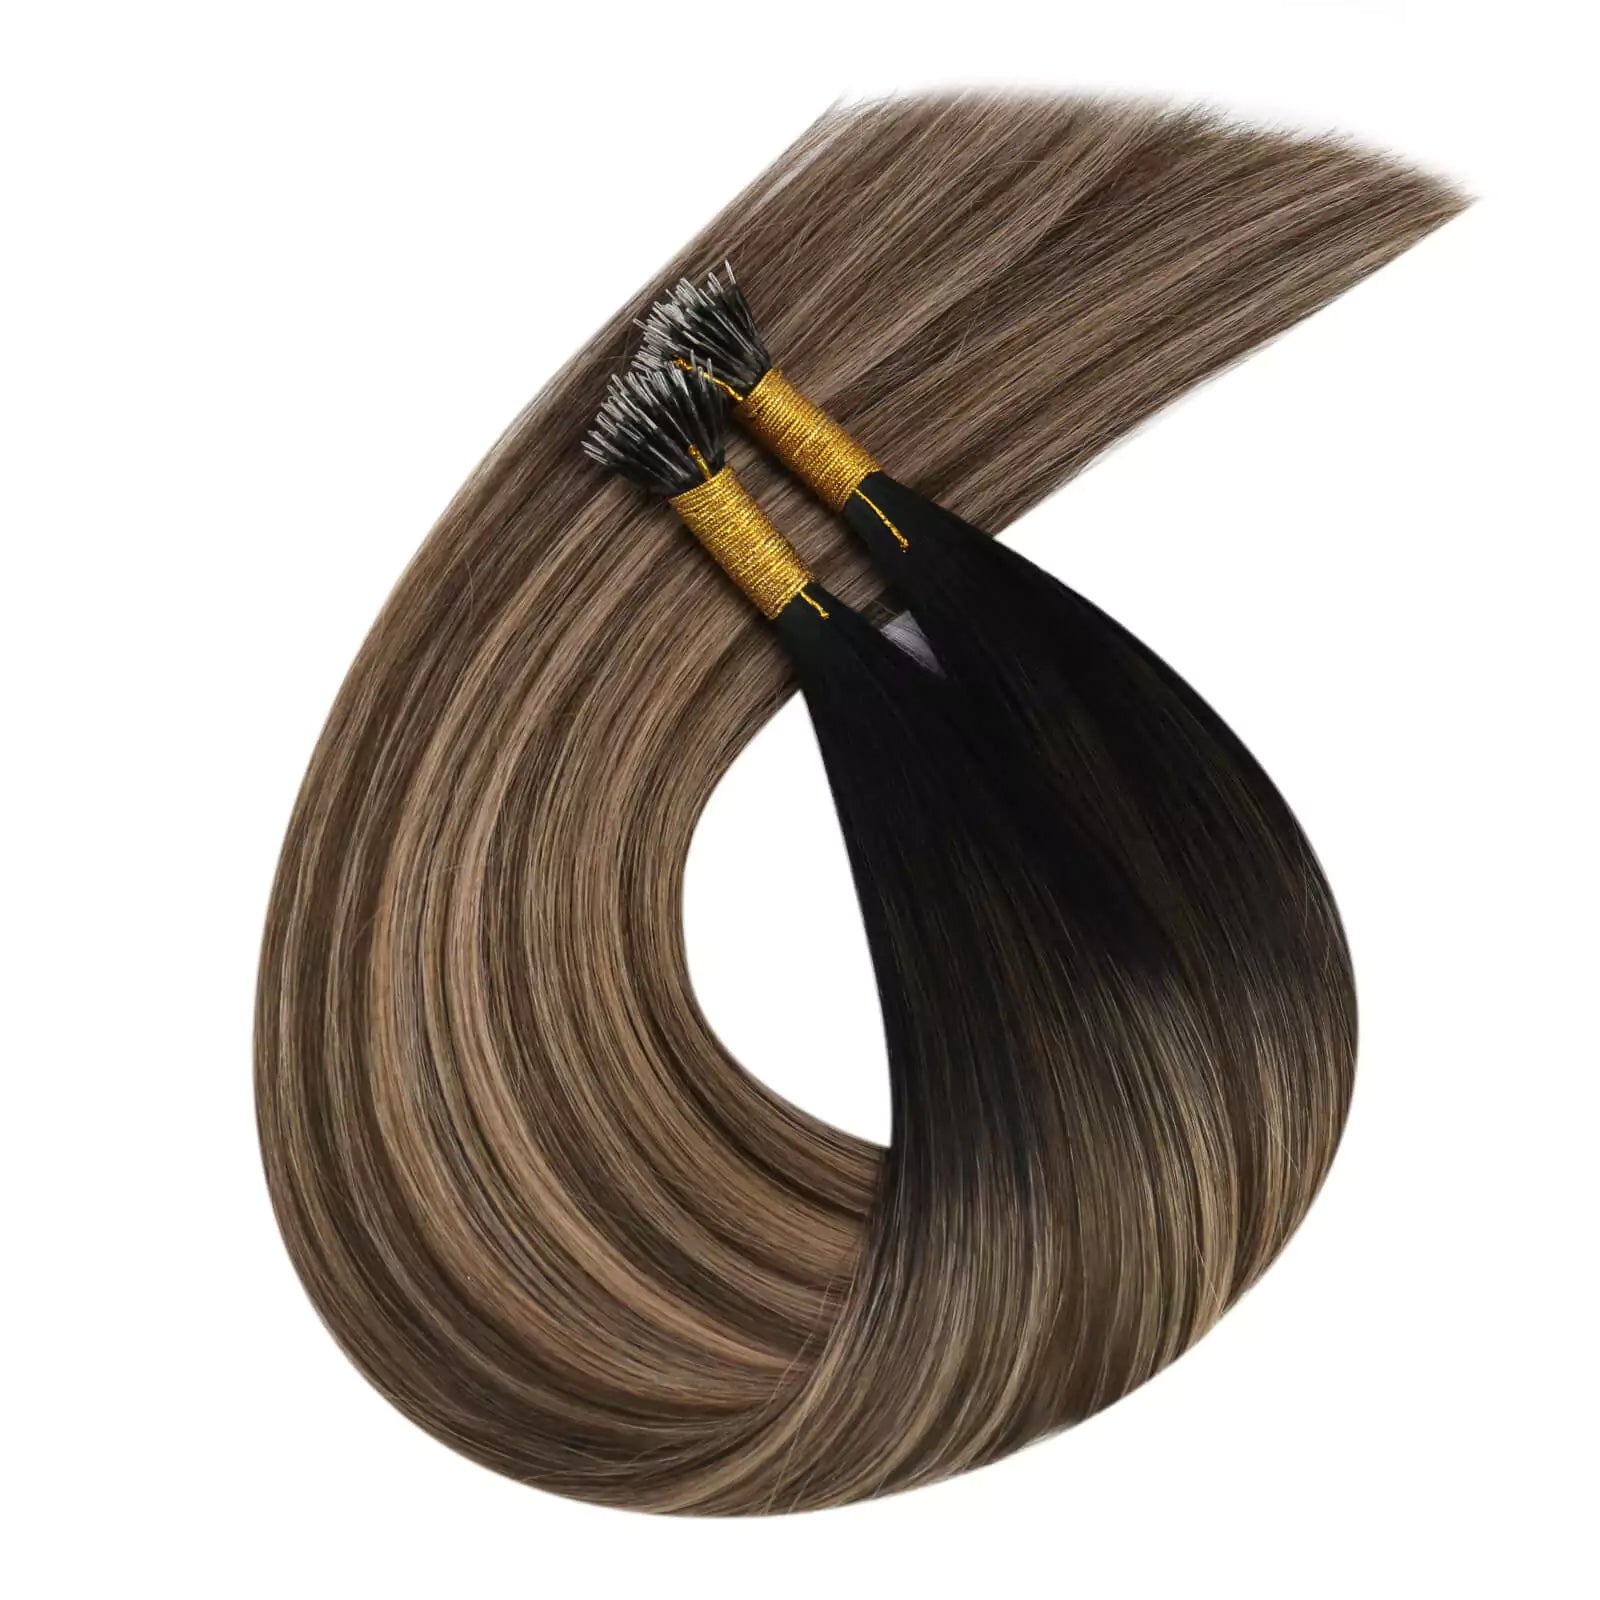 Nano Rong hair extensions your first chioce 1B/4/27